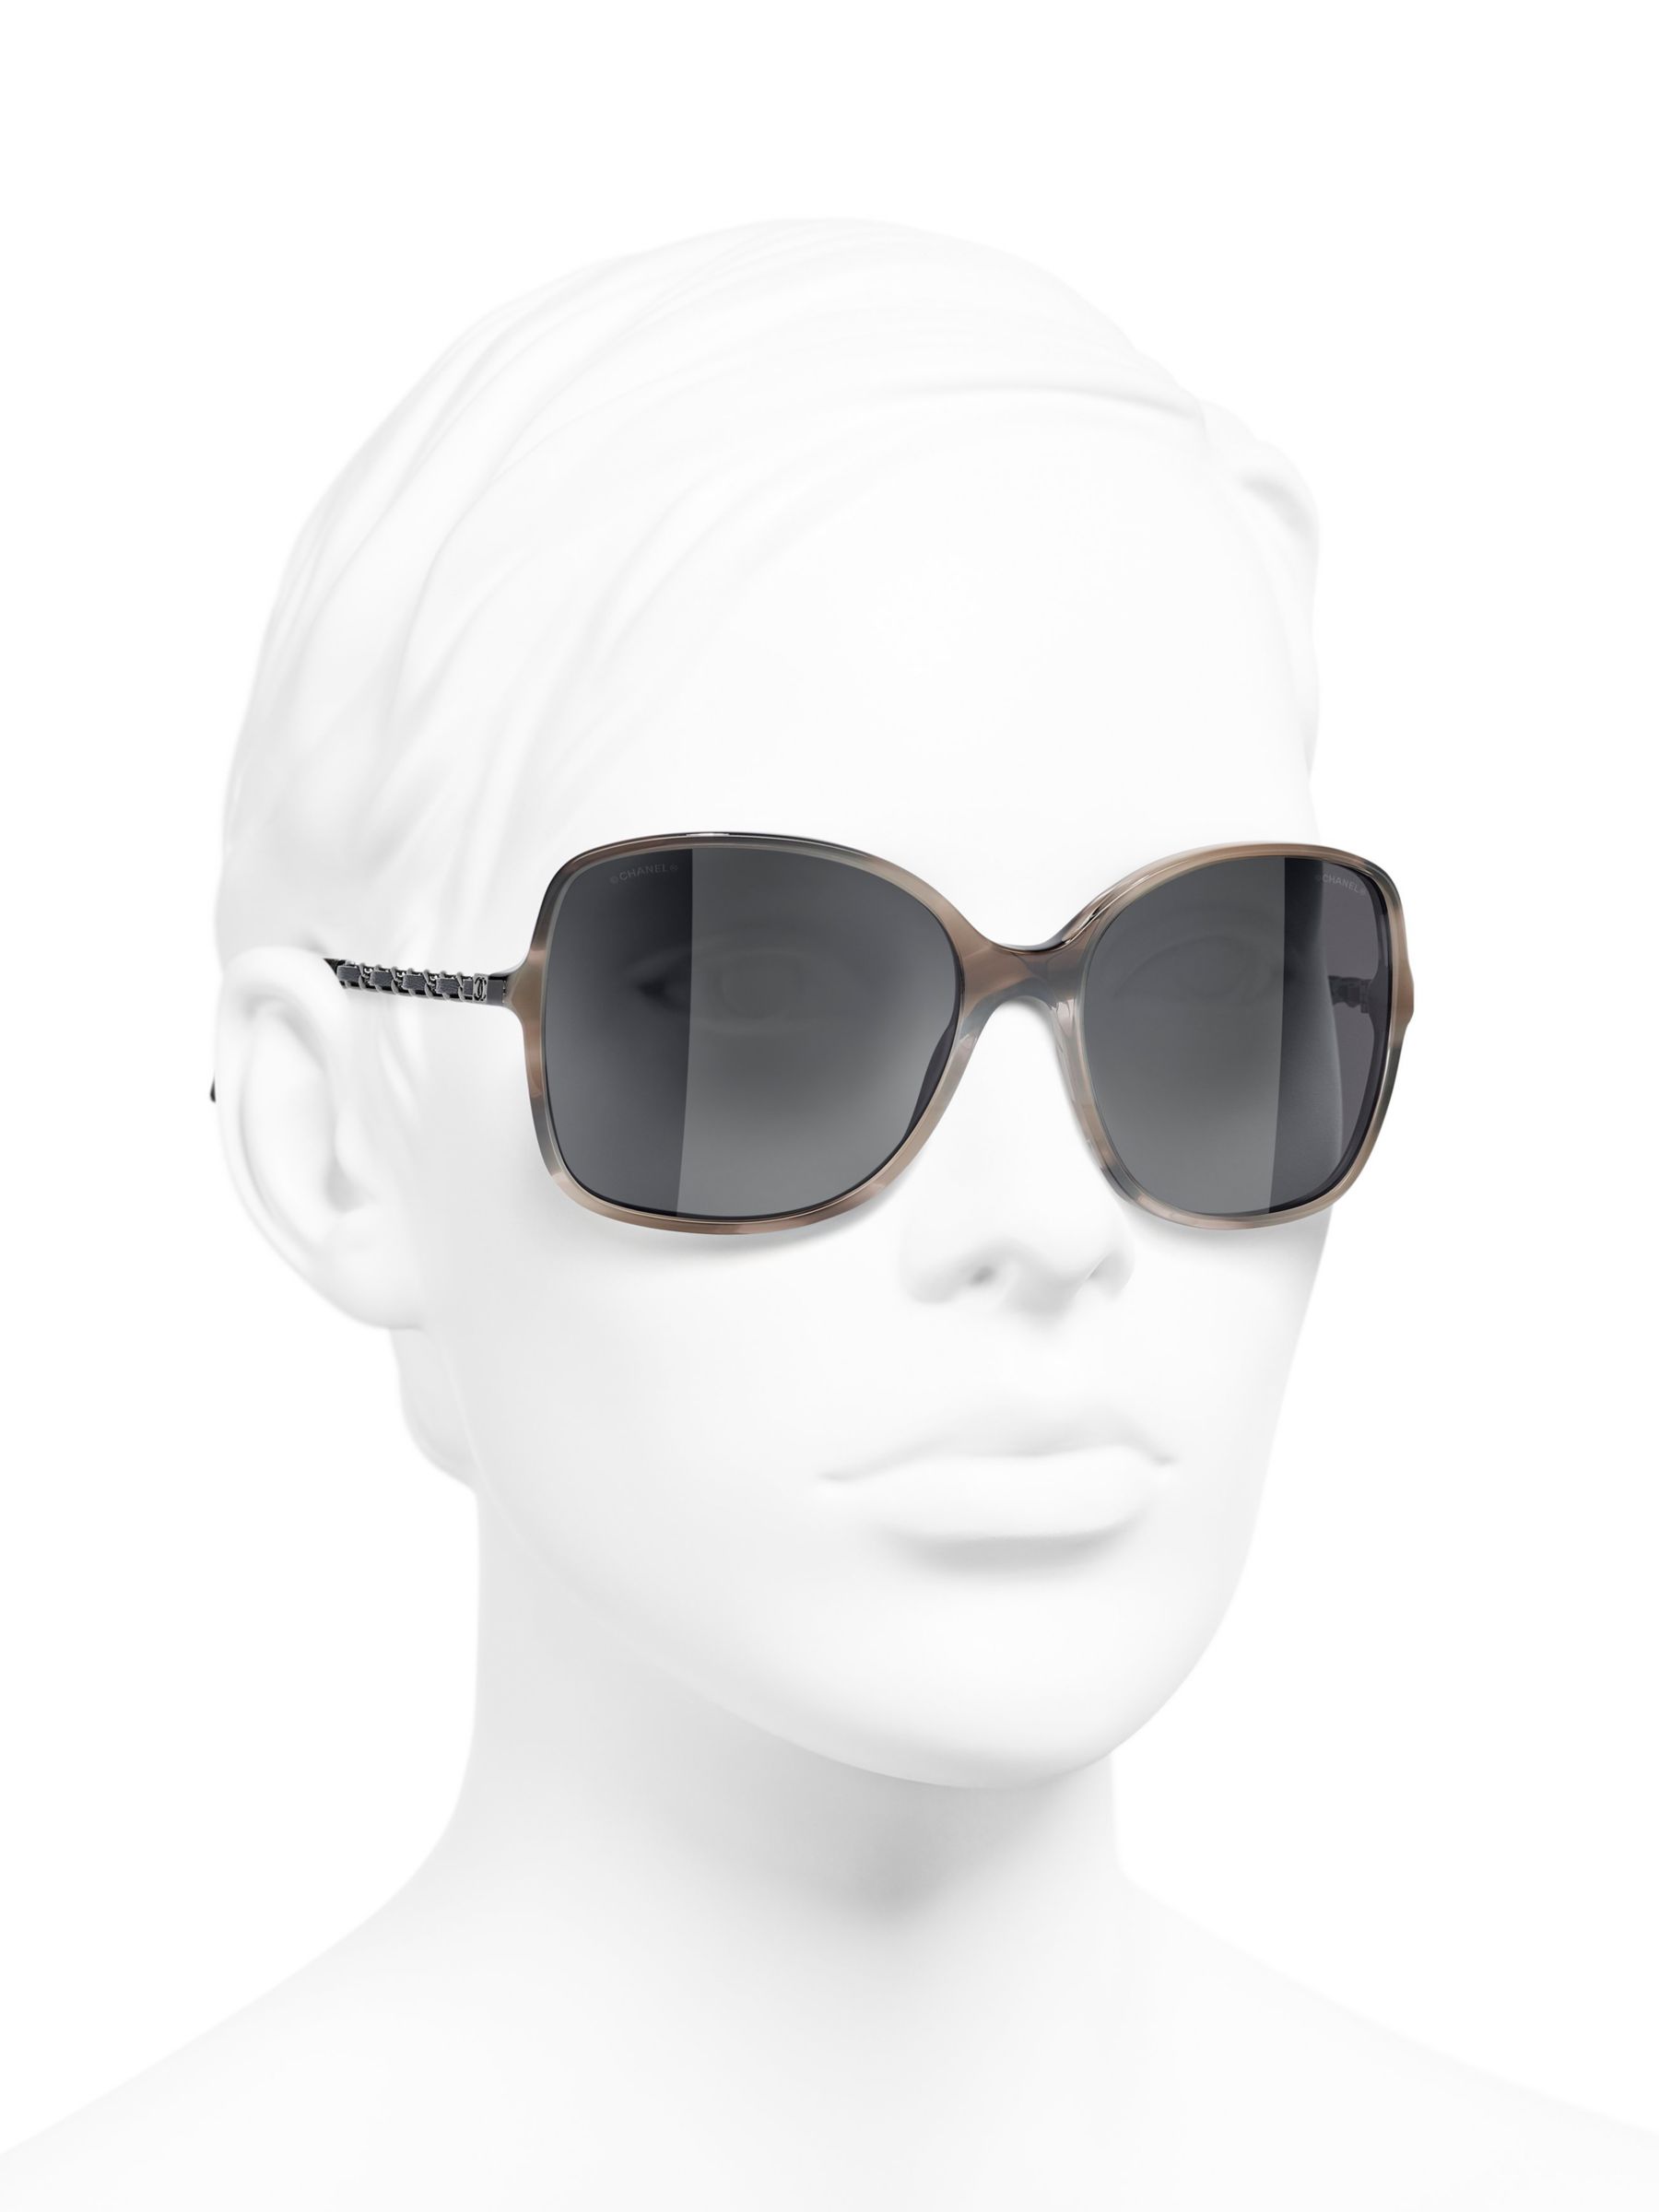 CHANEL Square Sunglasses CH5210Q Brown/Grey at John Lewis & Partners